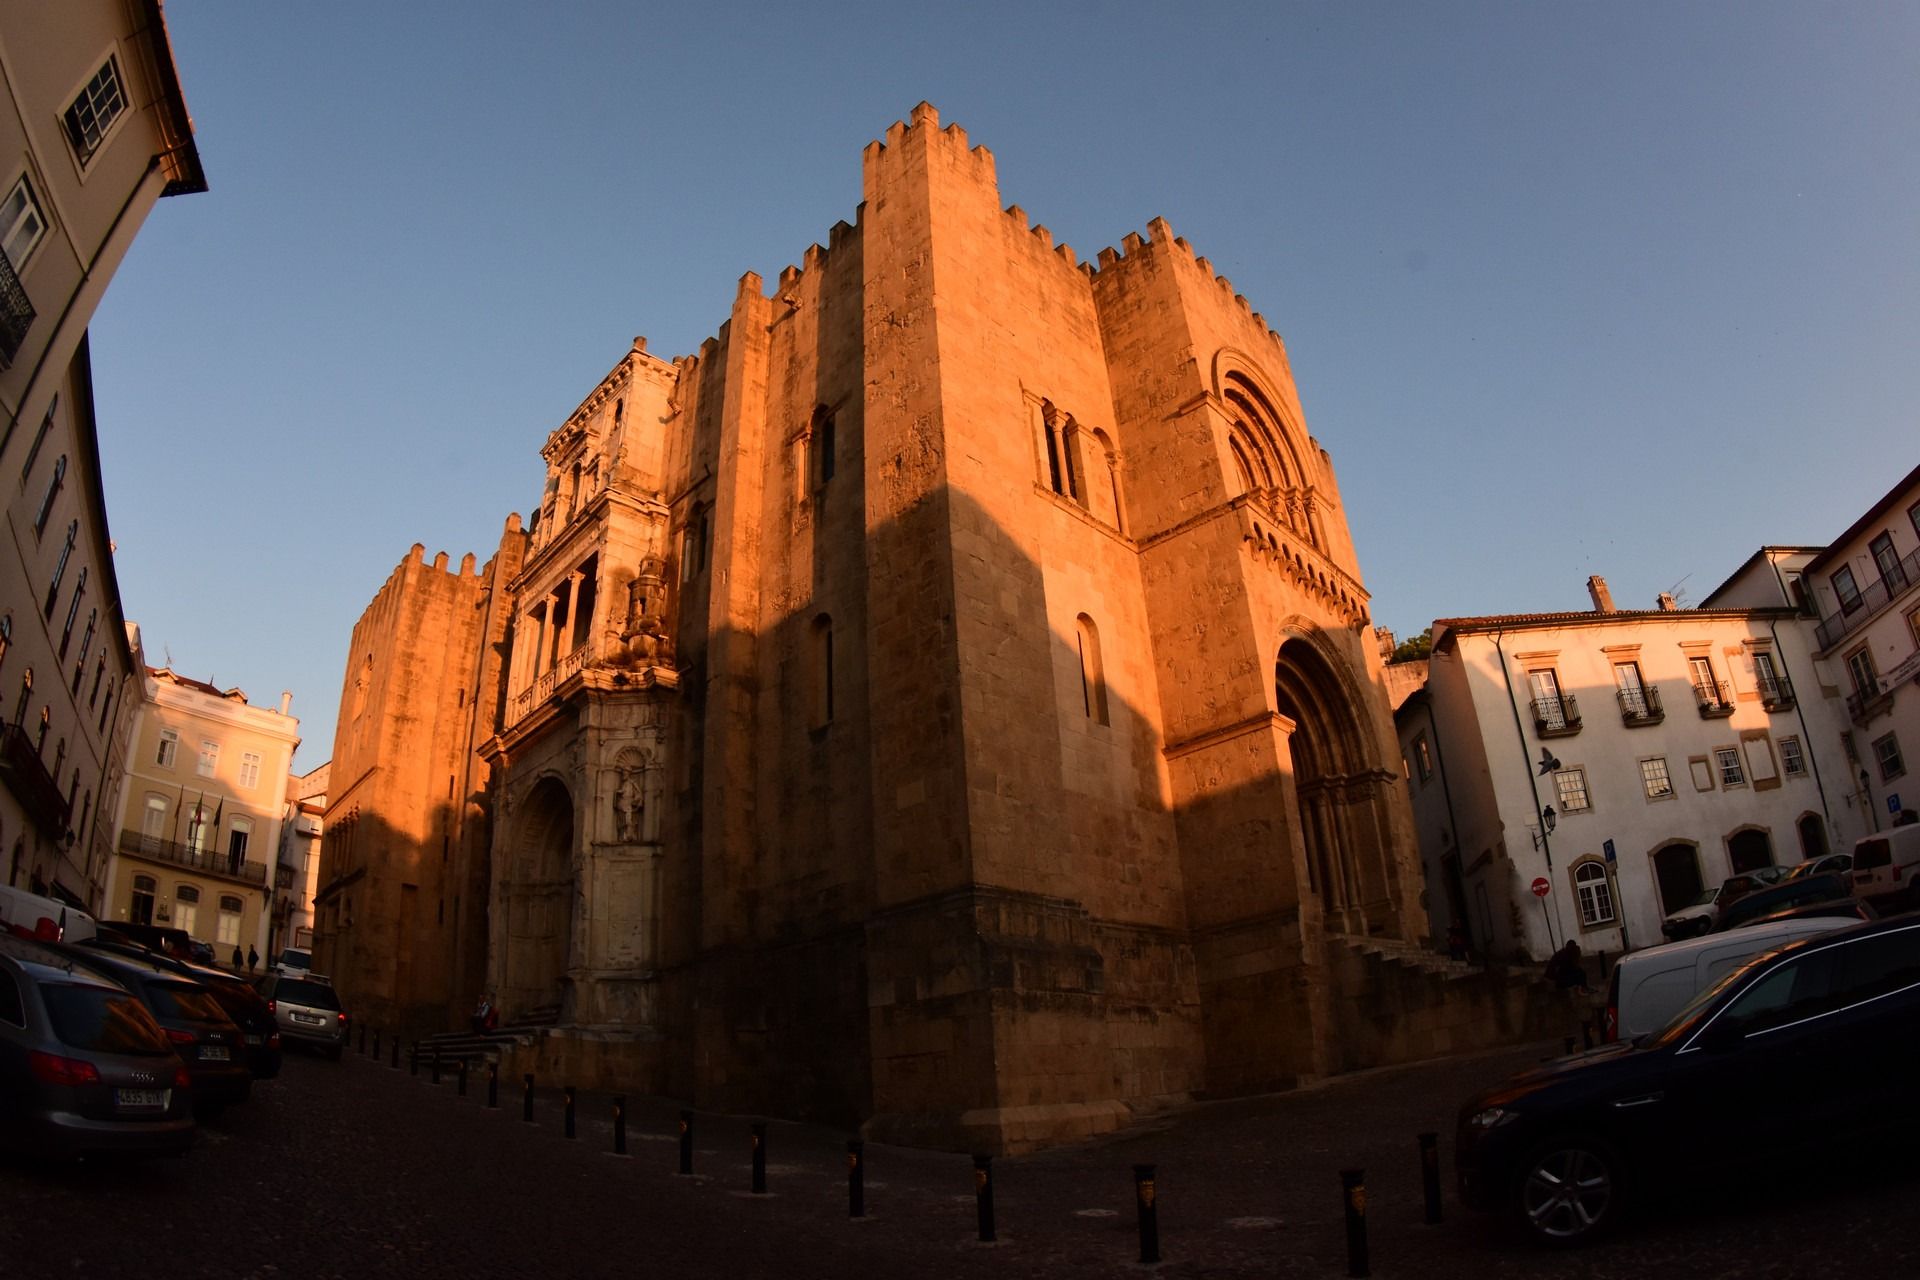 Portugal – First evening in Coimbra